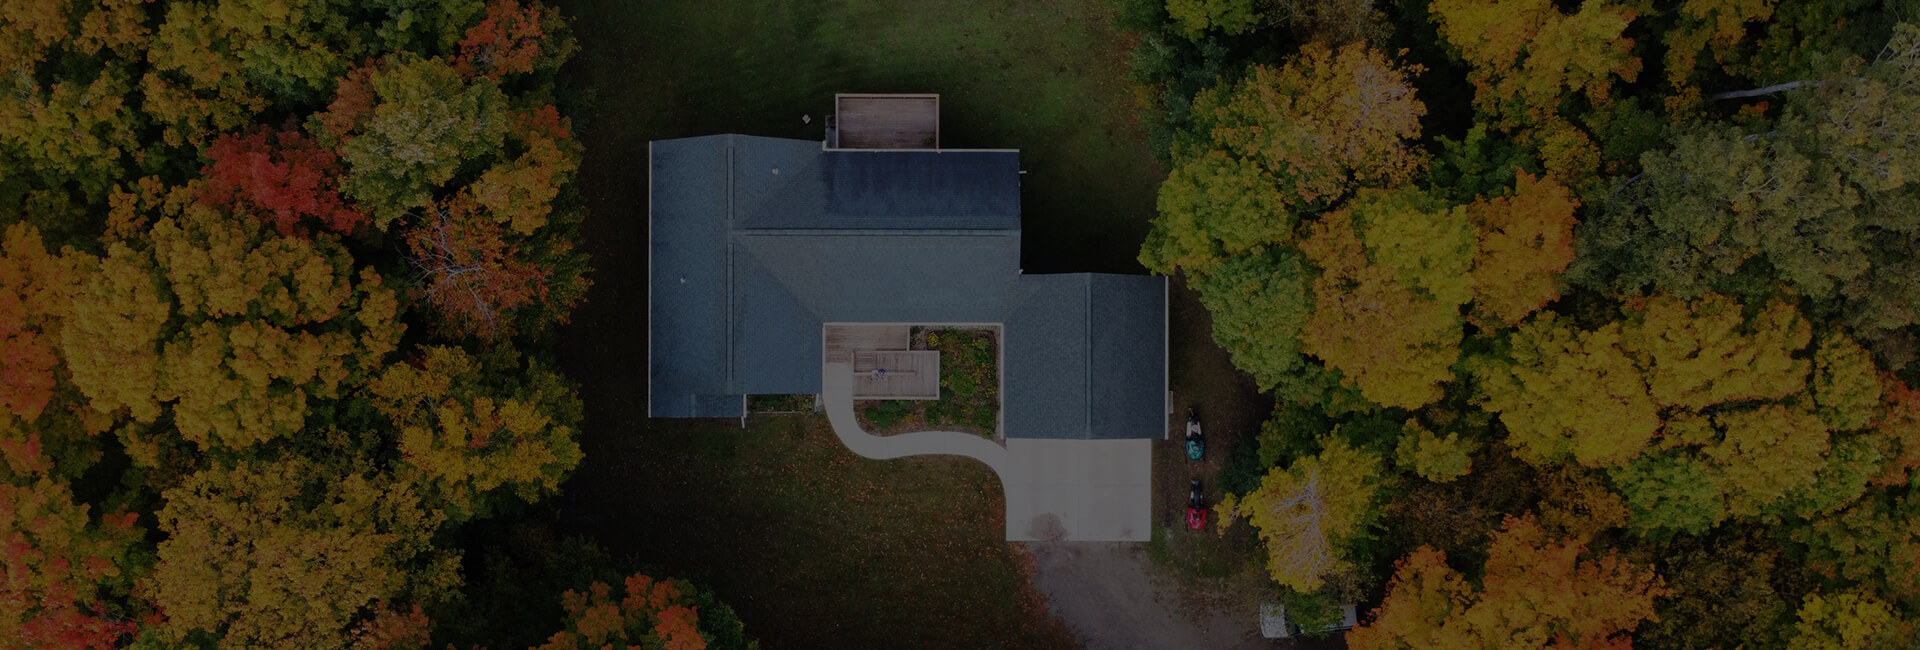 Birdseye view of a house's roof after having it's roof replaced by McCoy Roofing.